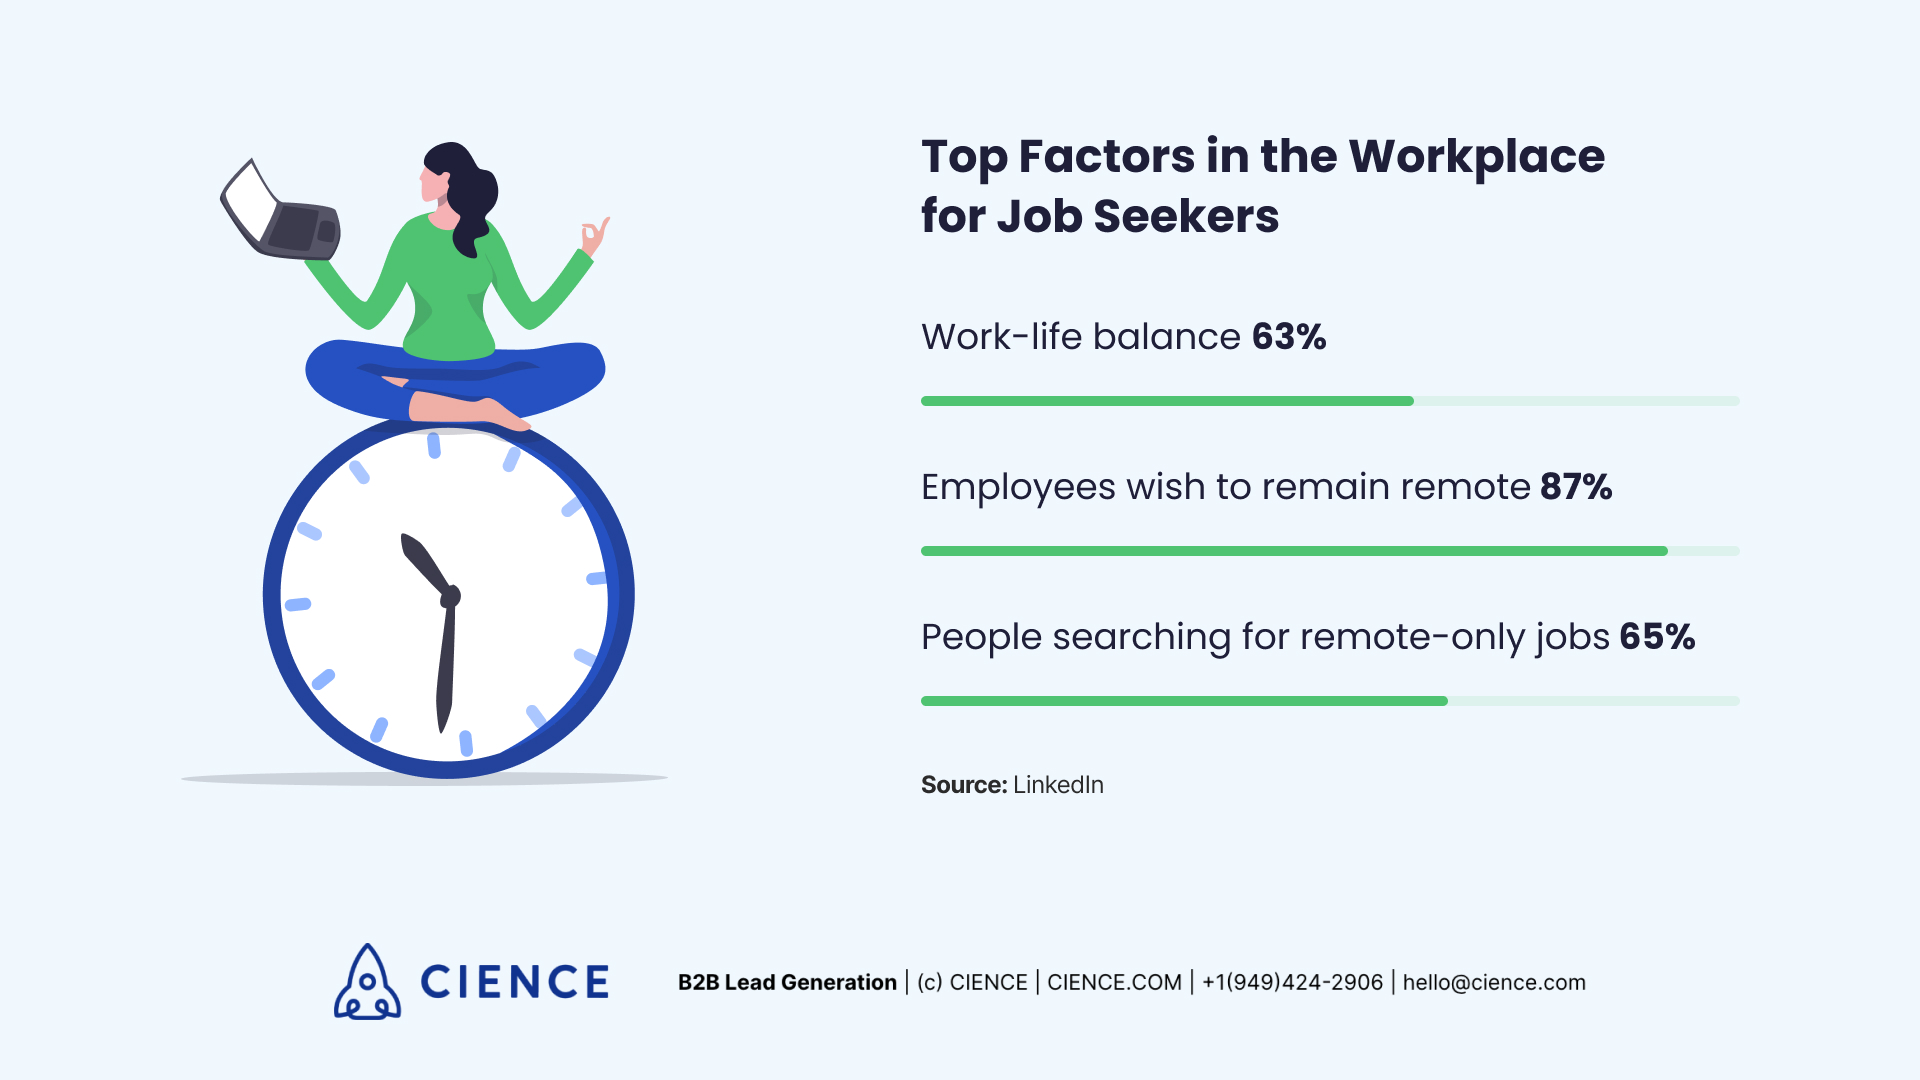 Top factors in the workplace for job seekers